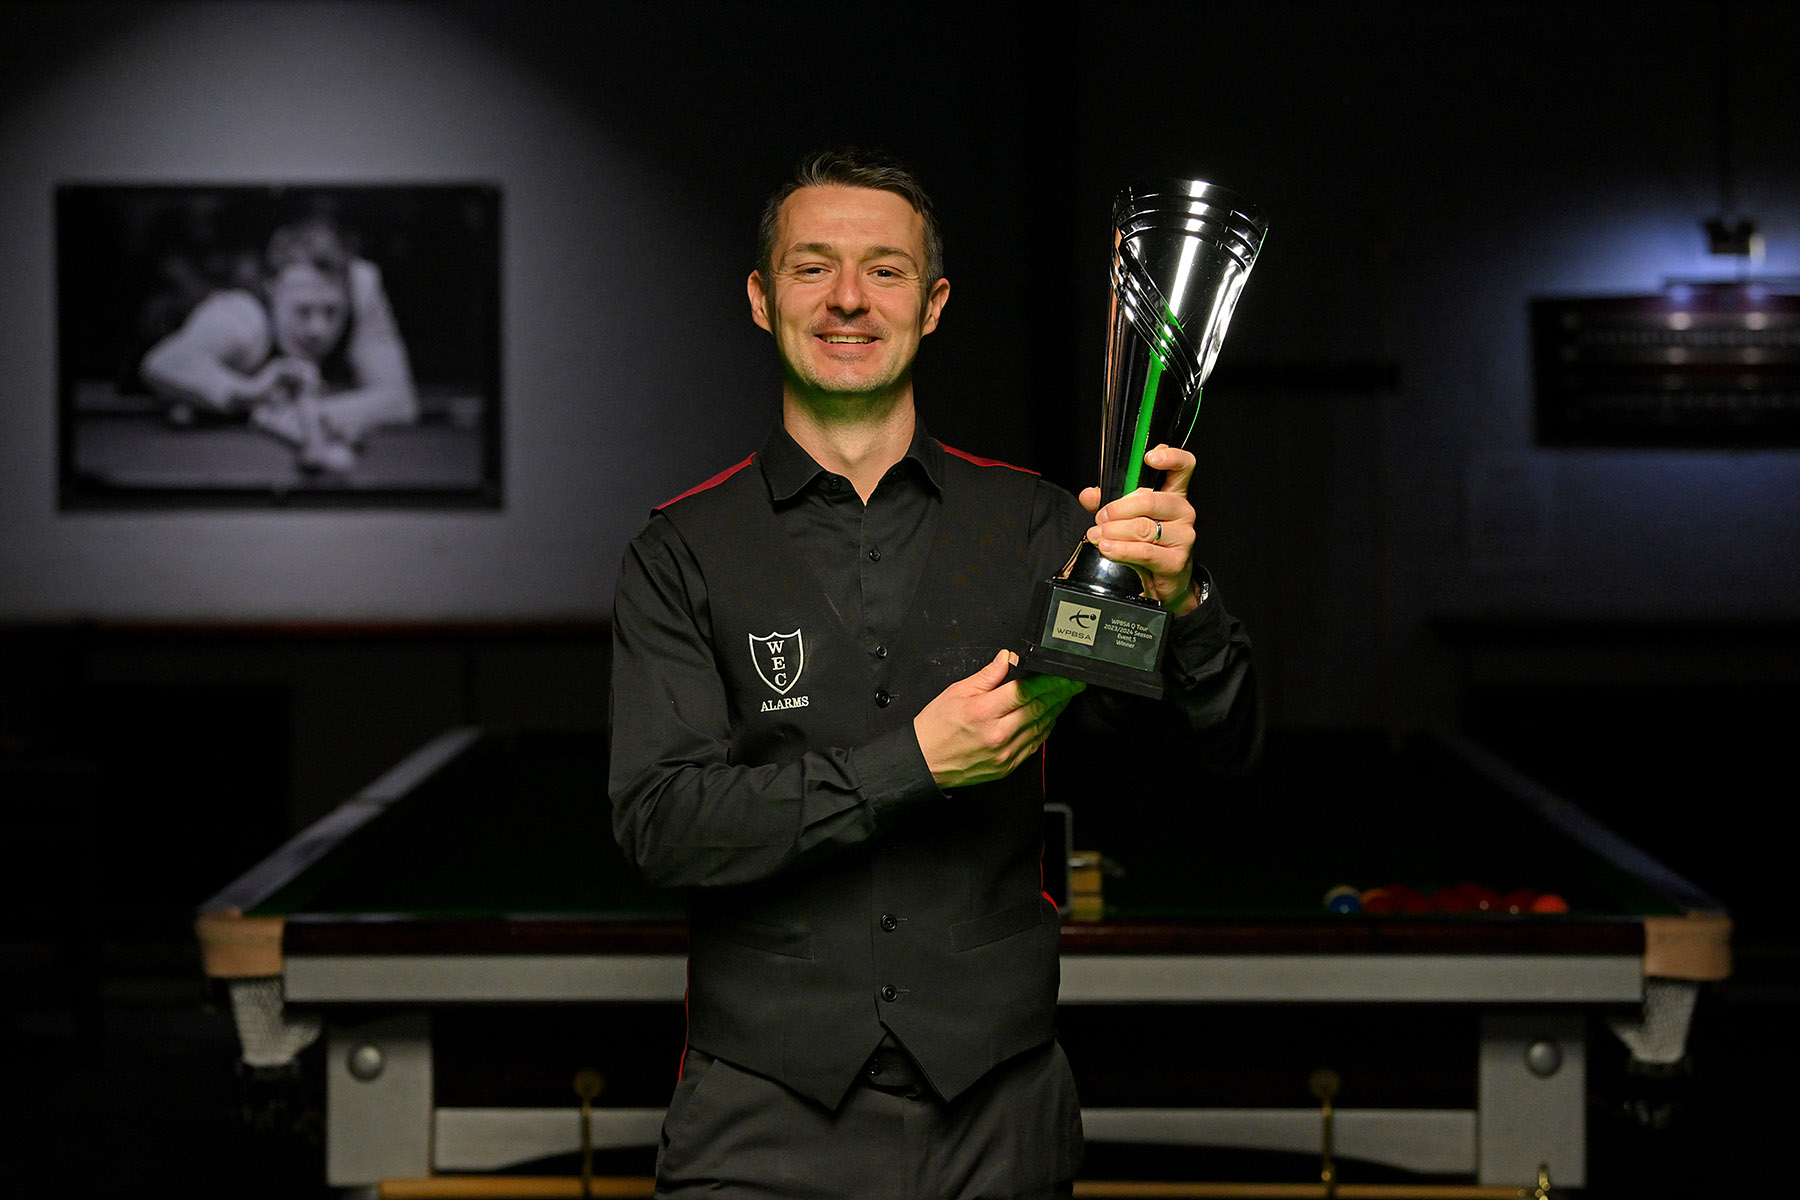 Michael Holt in his waistcoat, shirt and trousers lifts the Q Tour trophy in front of a snooker table.